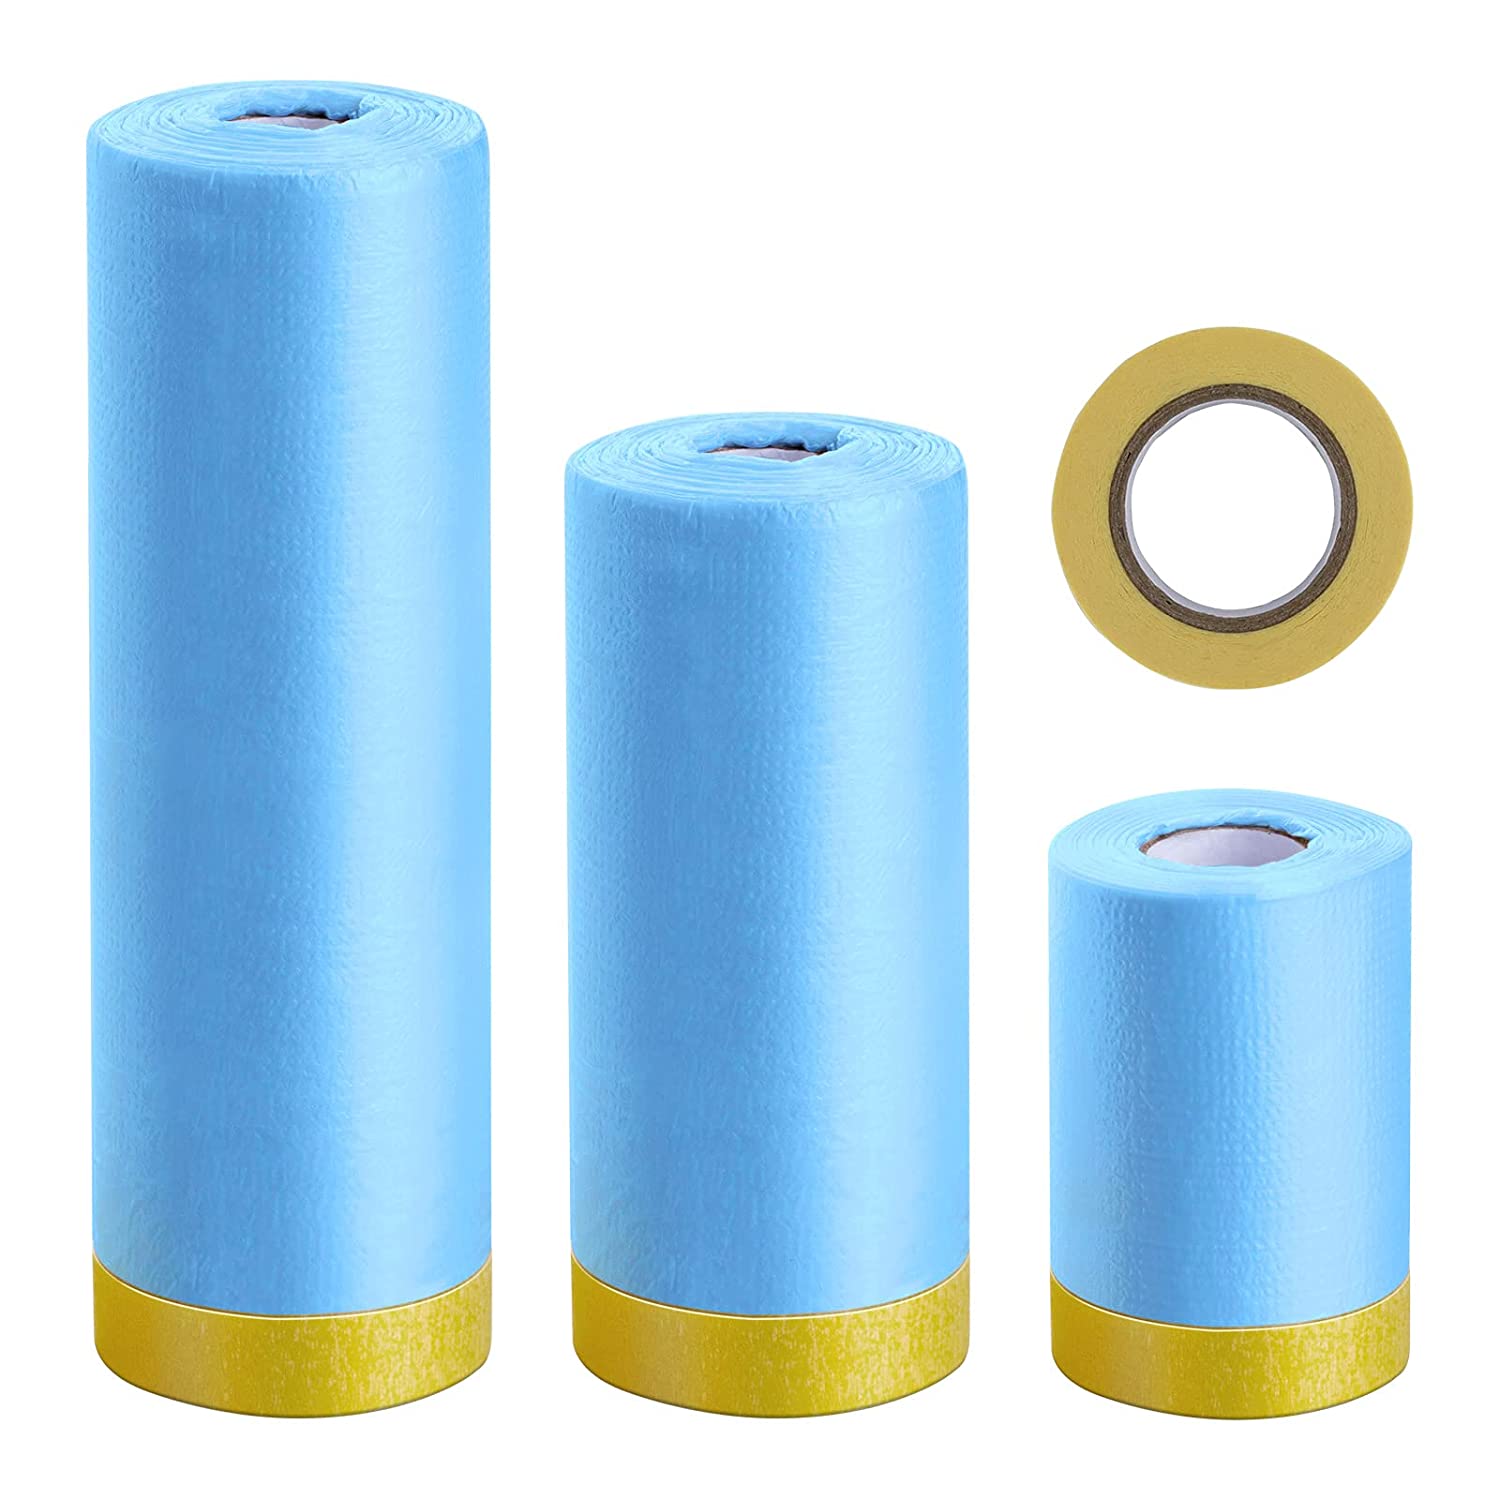 Lichamp Painters Tape Wide 1.5 inches, Masking Blue Painters Tape